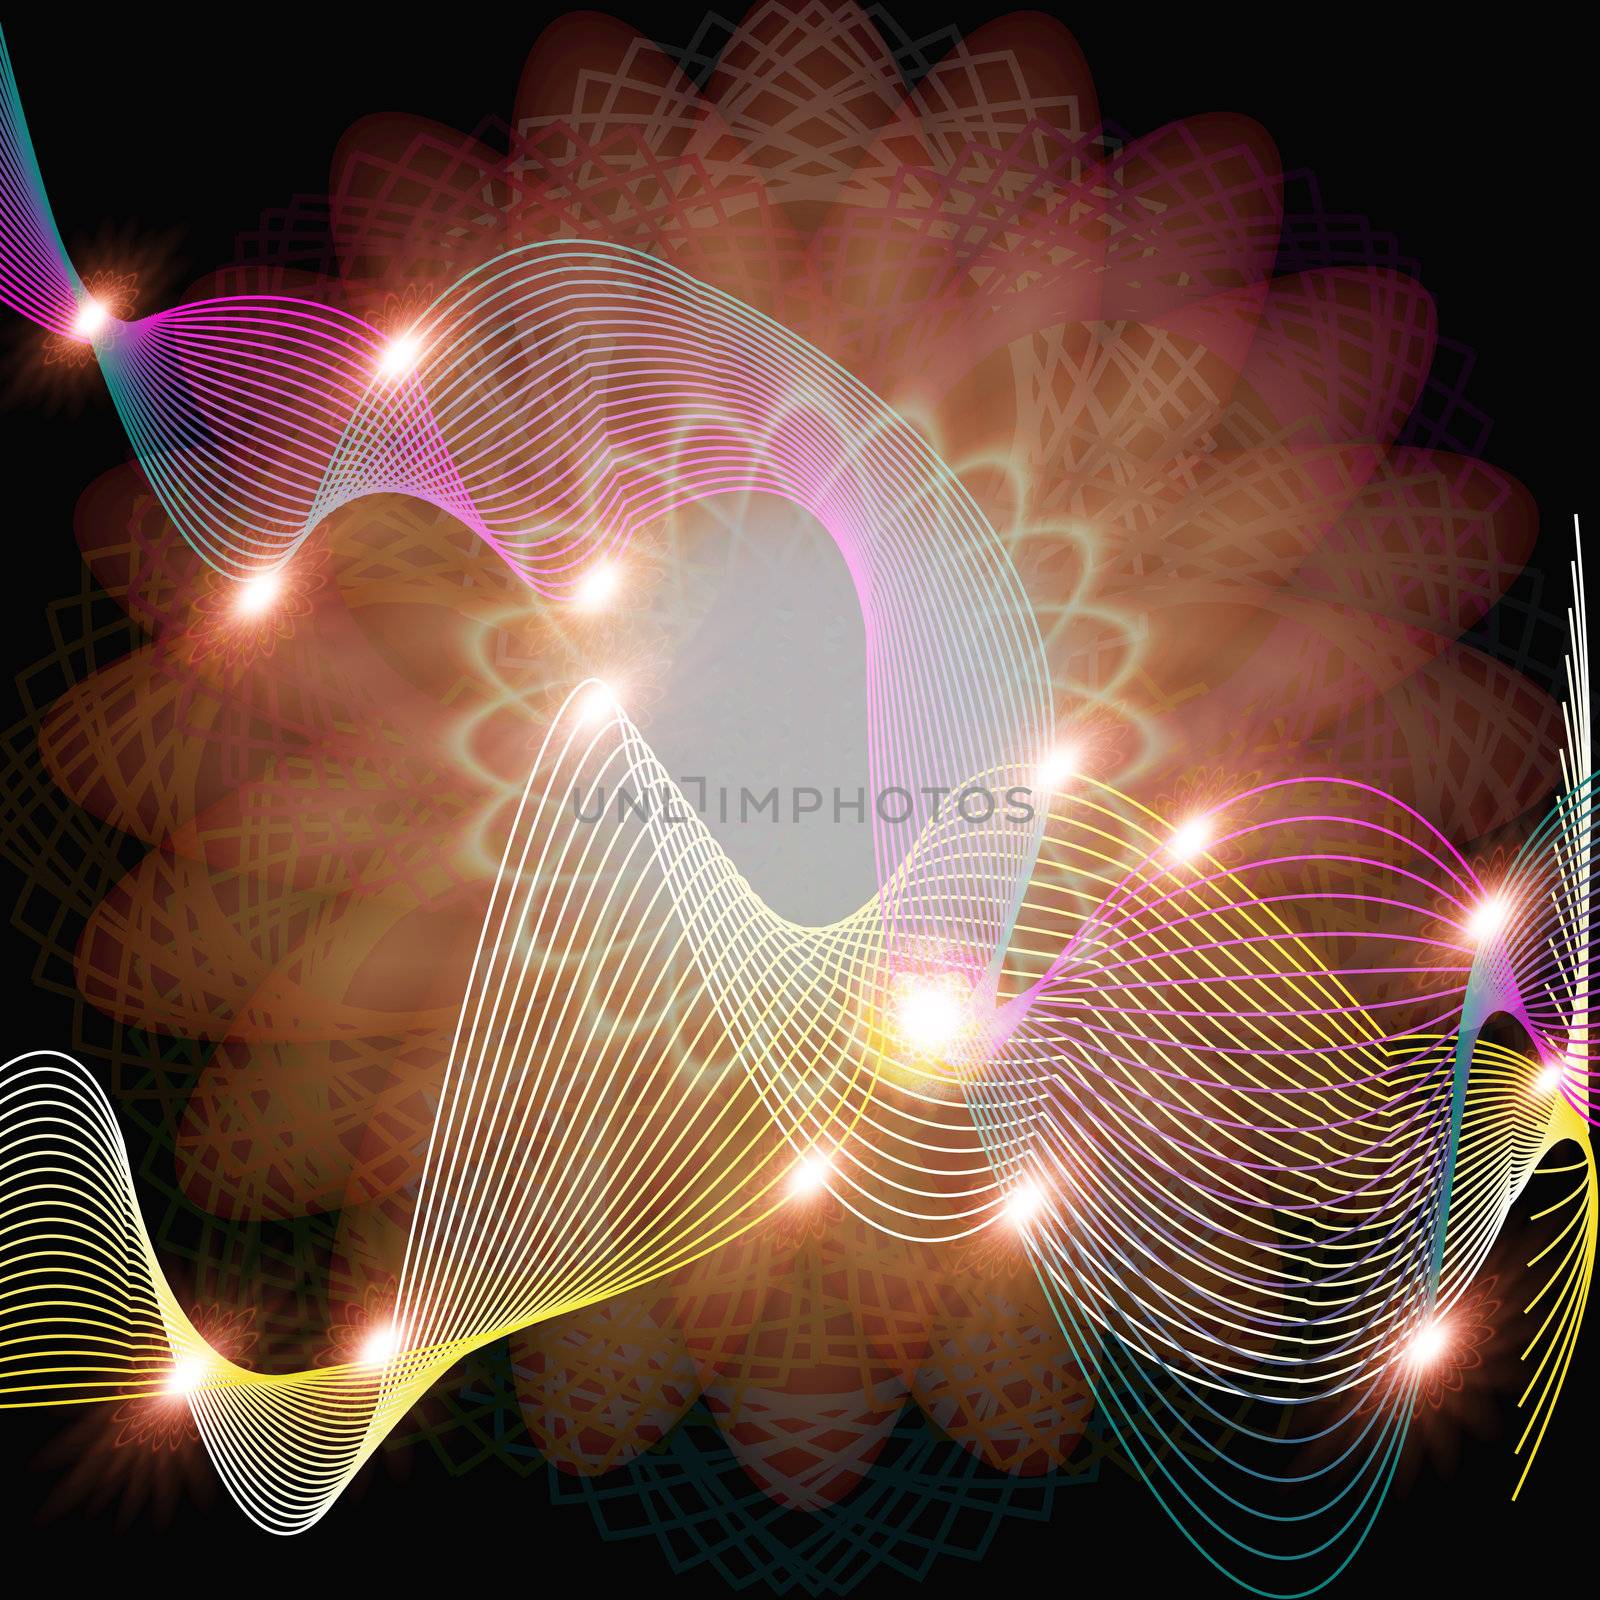 Abstract vector illustration on a dark background